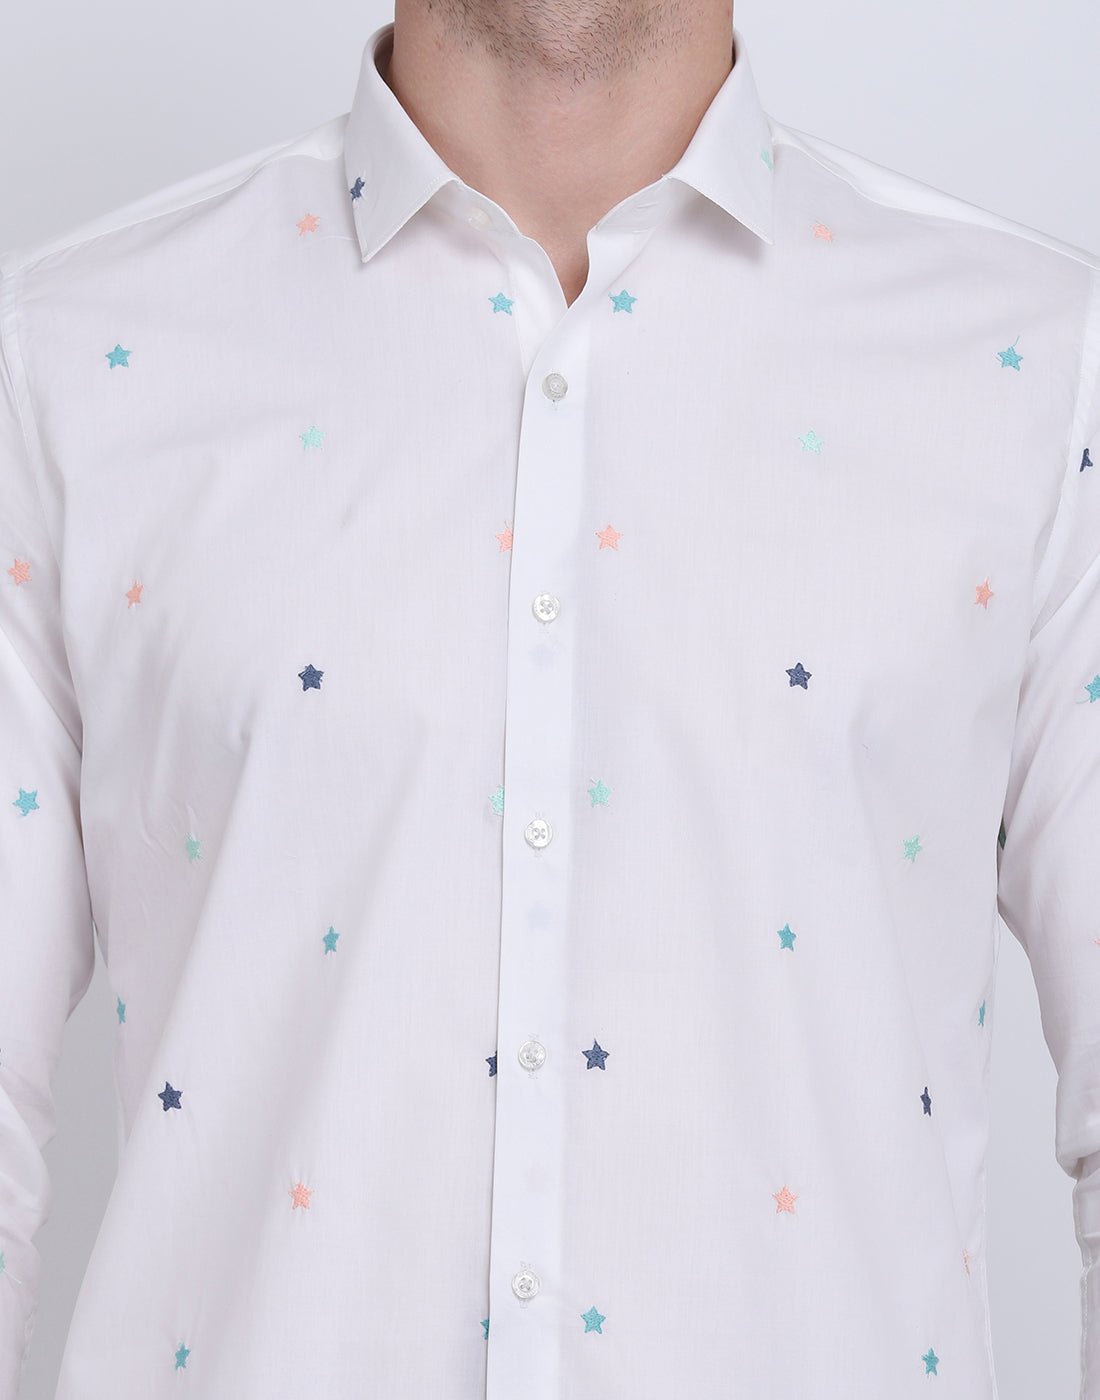 White with embroidered shirt Casual/Party Shirt